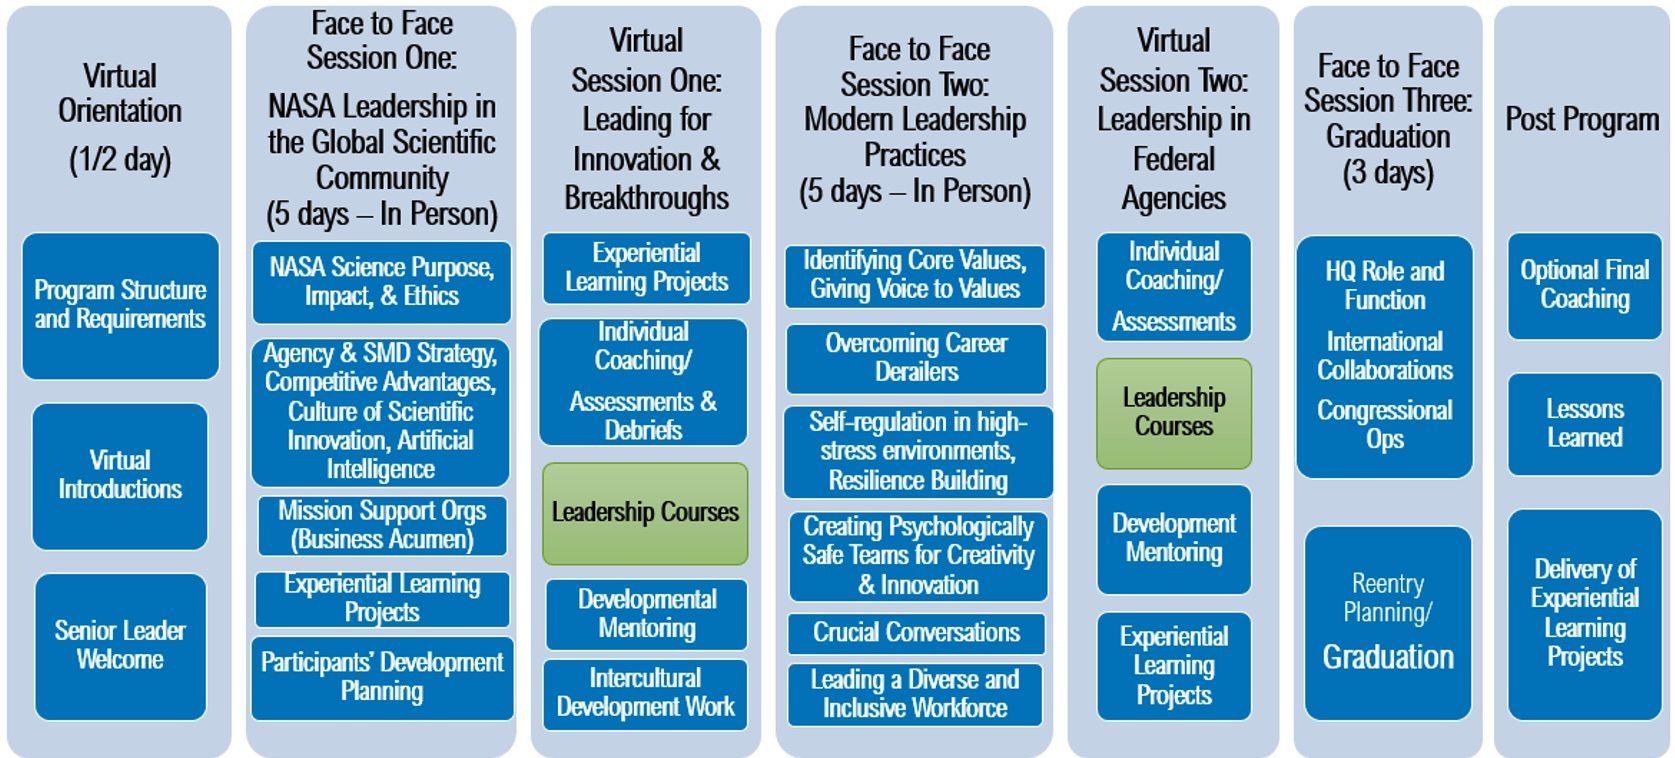 The image is a flowchart titled "NASA LEADS Pilot Program At-A-Glance," outlining the structure of a leadership development program. The chart is divided into seven main sections: 1. **Virtual Orientation (1/2 day)** - Program Structure and Requirements - Virtual Introductions - Senior Leader Welcome 2. **Face to Face Session One: NASA Leadership in the Global Scientific Community (5 days – In Person)** - NASA Science Purpose, Impact, & Ethics - Agency & SMD Strategy, Competitive Advantages, Culture of Scientific Innovation, Artificial Intelligence - Mission Support Orgs (Business Acumen) - Experiential Learning Projects - Participants’ Development Planning 3. **Virtual Session One: Leading for Innovation & Breakthroughs** - Experiential Learning Projects - Individual Coaching/Assessments & Debriefs - Leadership Courses - Developmental Mentoring - Intercultural Development Work 4. **Face to Face Session Two: Modern Leadership Practices (5 days – In Person)** - Identifying Core Values, Giving Voice to Values - Overcoming Career Derailers - Self-regulation in high-stress environments, Resilience Building - Creating Psychologically Safe Teams for Creativity & Innovation - Crucial Conversations - Leading a Diverse and Inclusive Workforce 5. **Virtual Session Two: Leadership in Federal Agencies** - Individual Coaching/Assessments - Leadership Courses - Development Mentoring - Experiential Learning Projects 6. **Face to Face Session Three: Graduation (3 days)** - HQ Role and Function - International Collaborations - Congressional Ops - Reentry Planning/Graduation 7. **Post Program** - Optional Final Coaching - Lessons Learned - Delivery of Experiential Learning Projects Each section contains various modules, projects, and development activities aimed at enhancing leadership skills within the NASA framework.